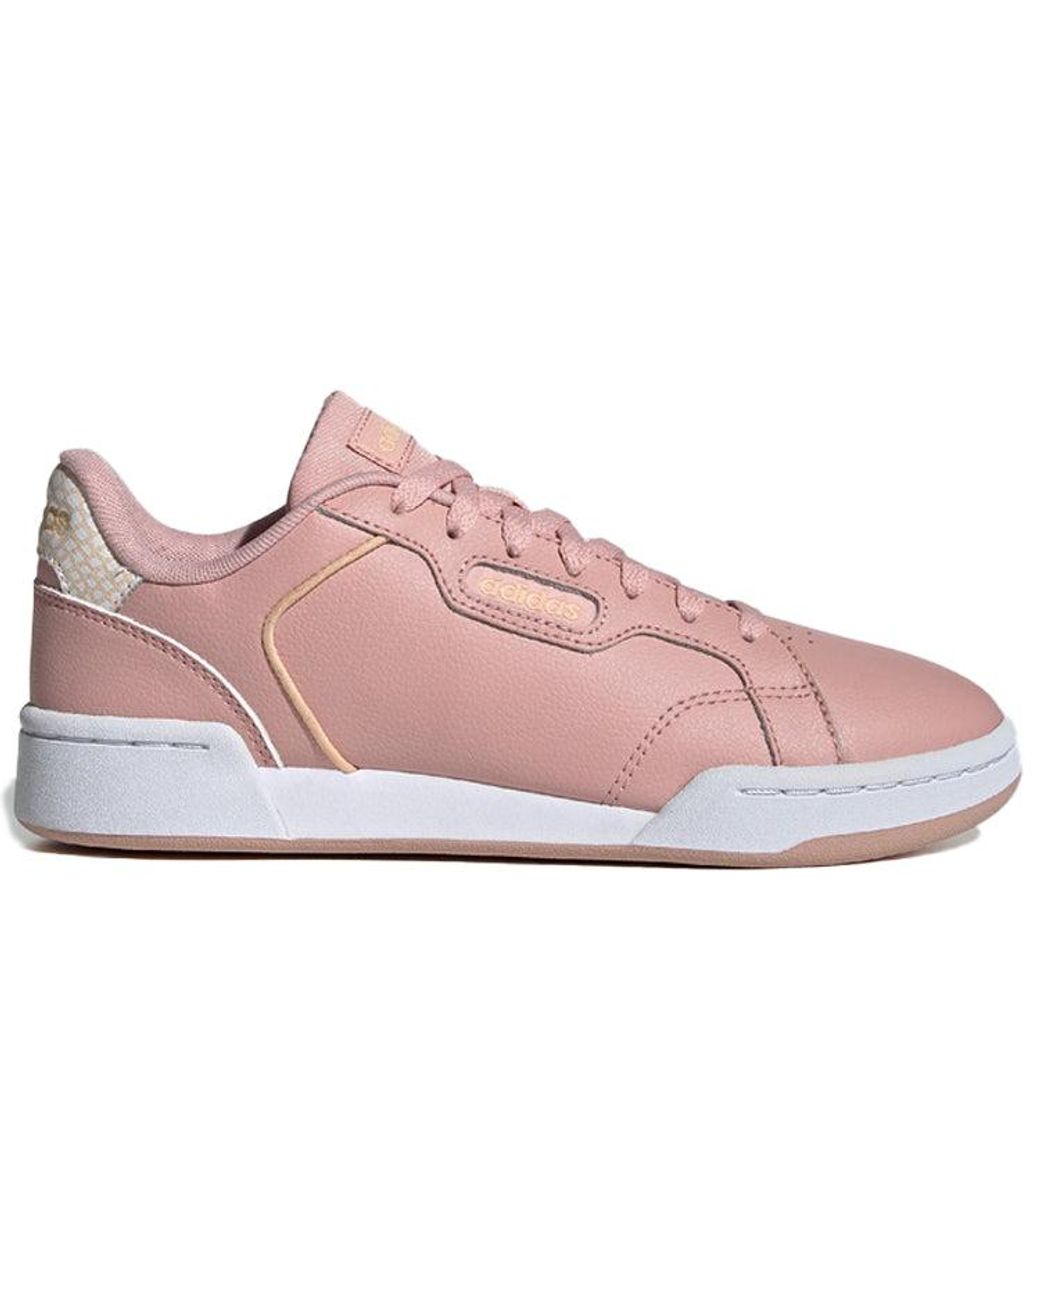 adidas Roguera in Pink | Lyst